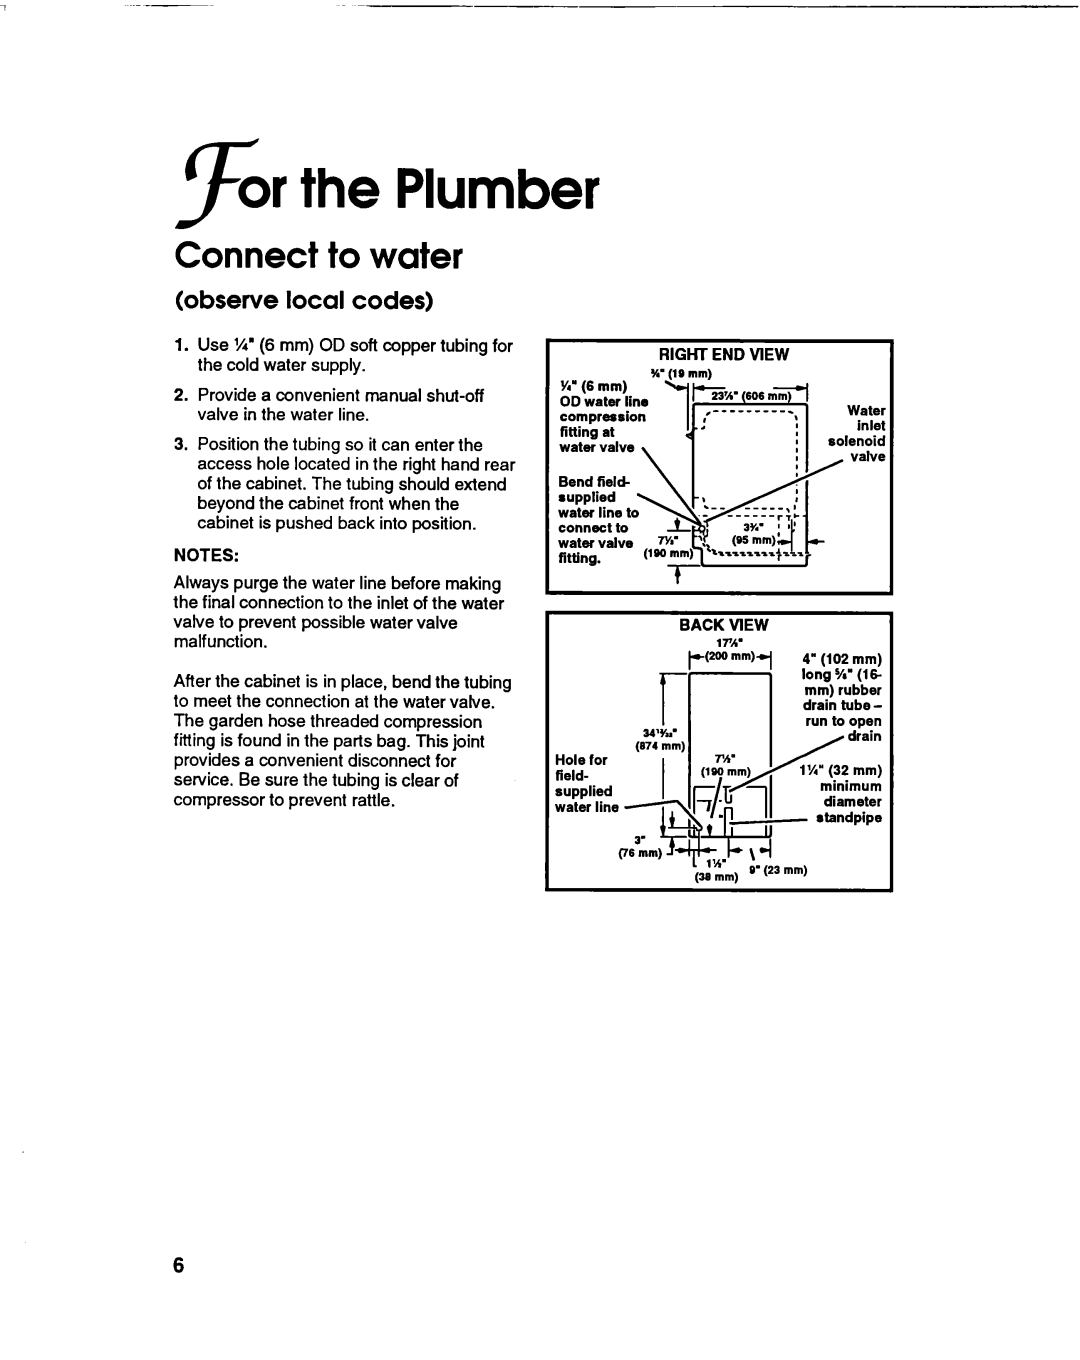 KitchenAid KULSL85 installation instructions For the Plumber, Connect to water, observe local codes 